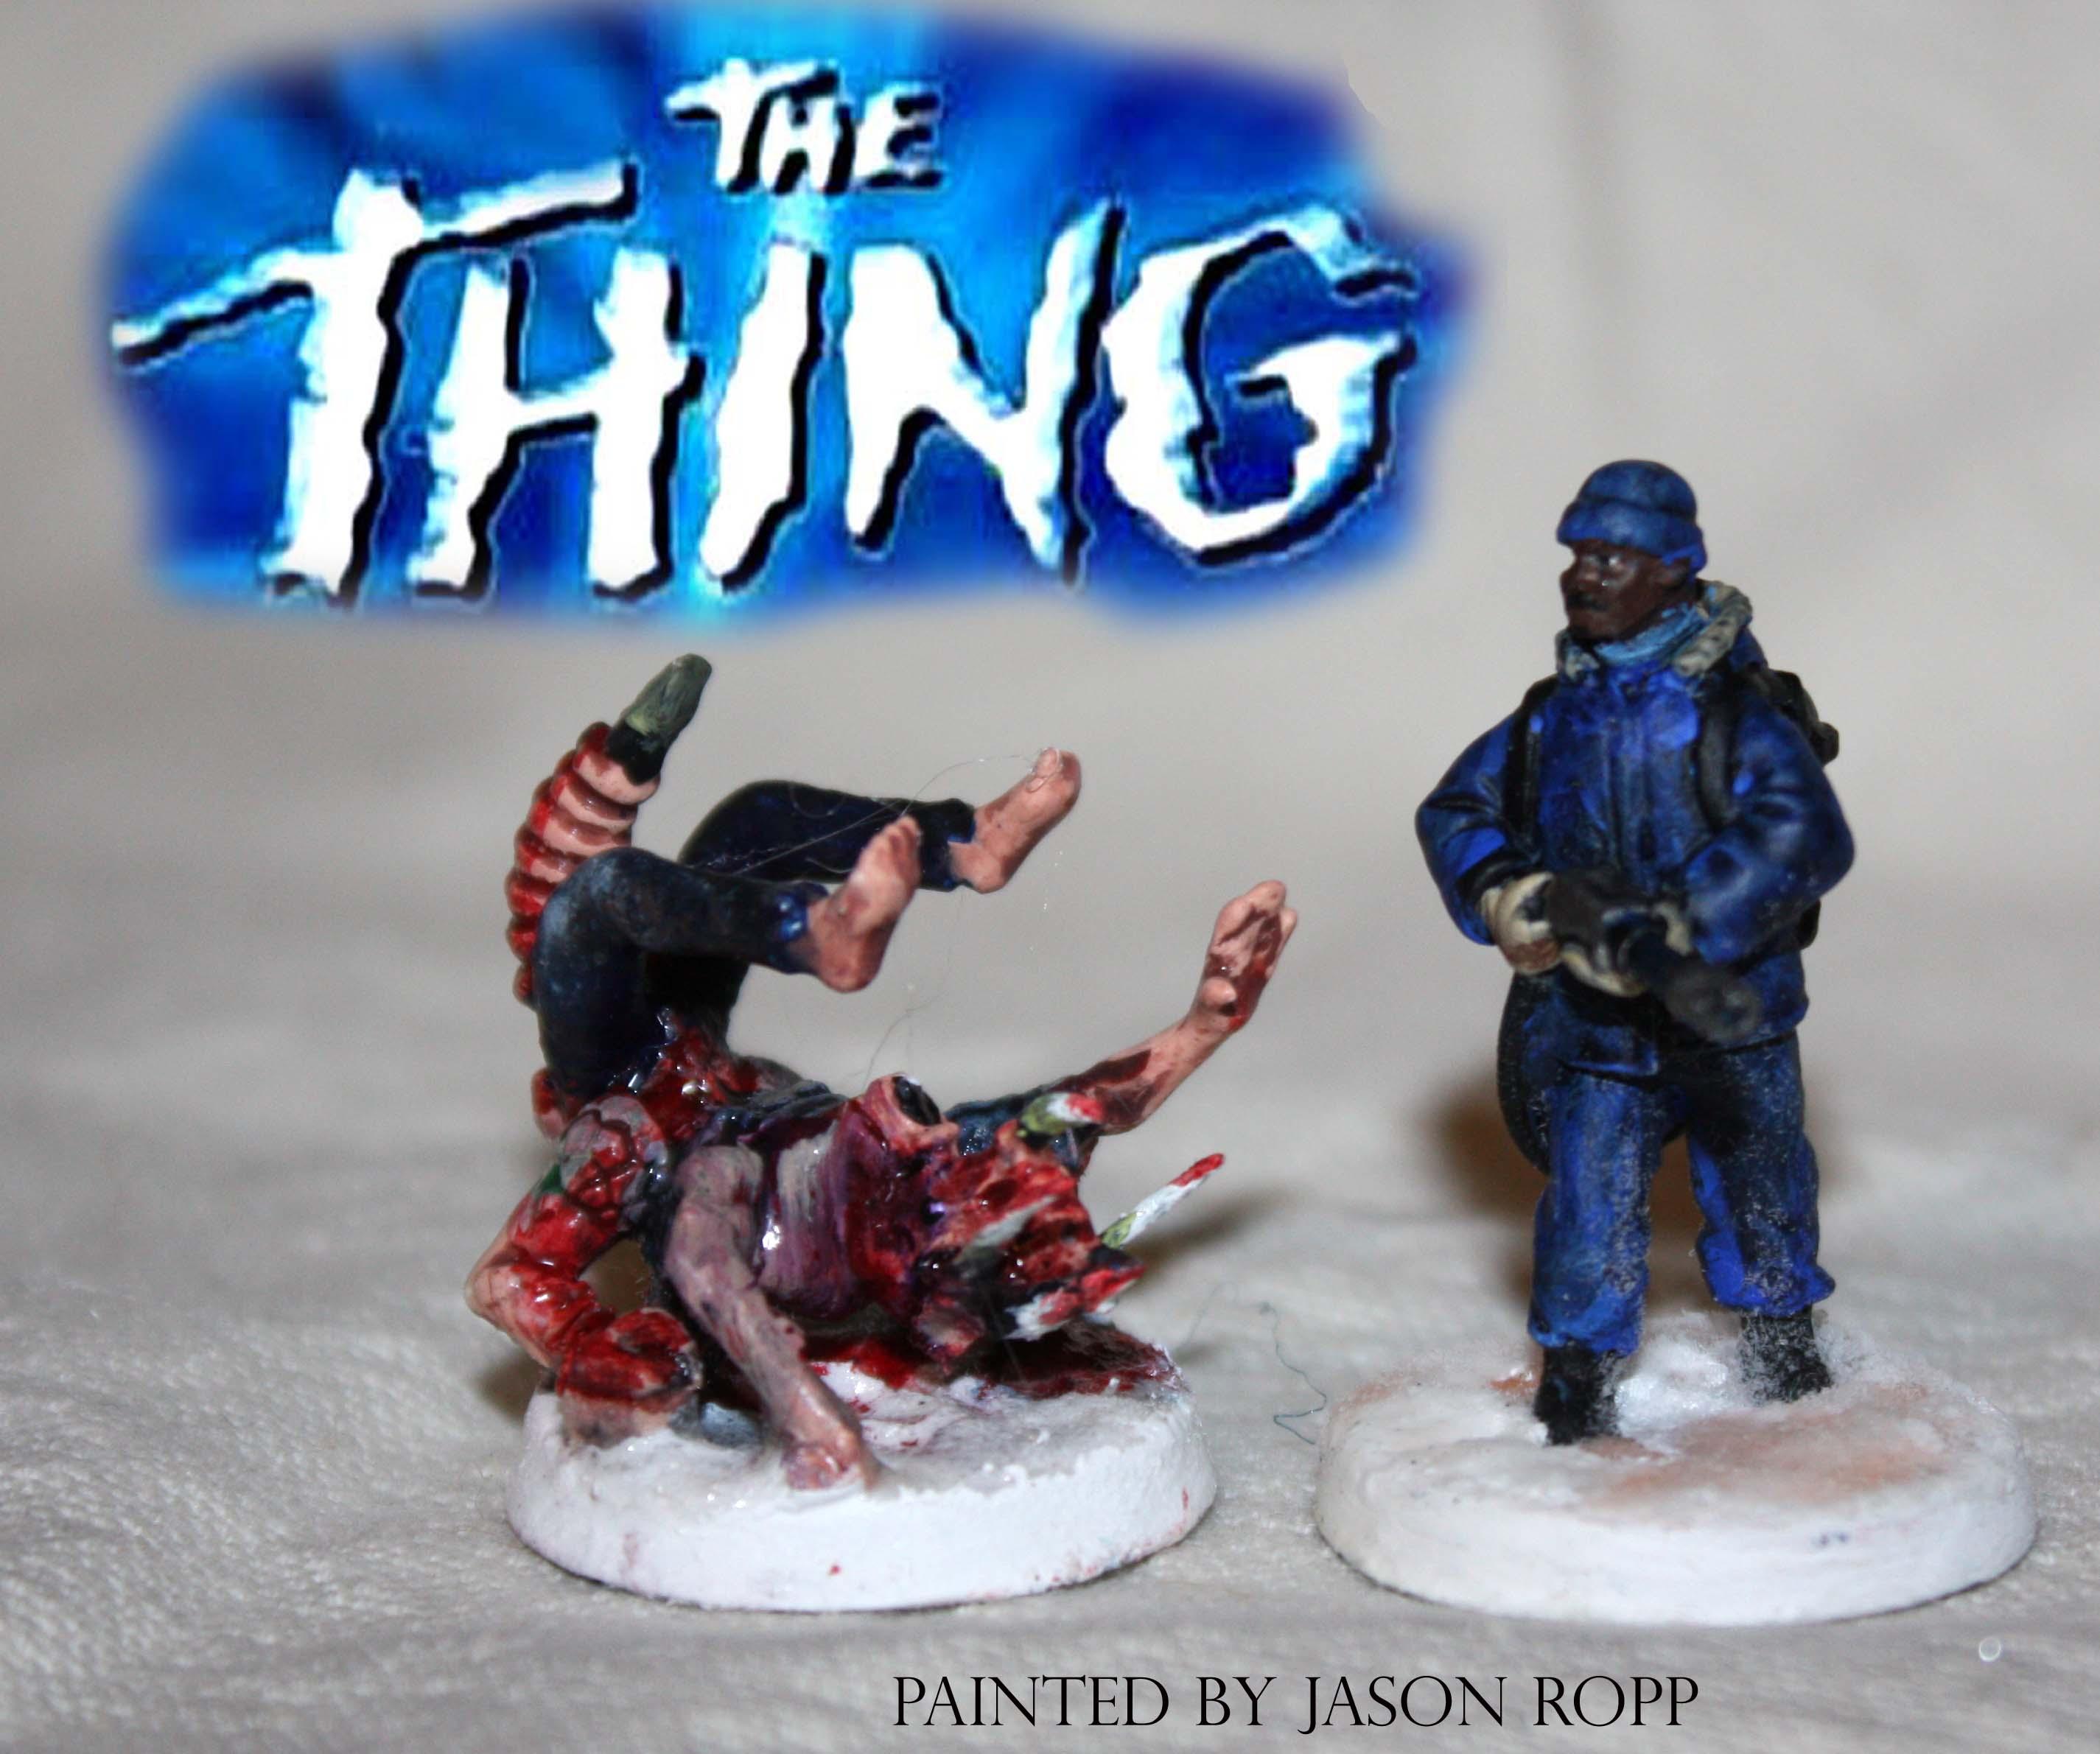 28mm, Alien, Alines Vs Predator, Avp, Contortionist, Conversion, From Another World, Horrorclix, Miniature, Miniatures, Monster, The Thing, Thing, Things, Wargame, Warhammer 40,000, Weird